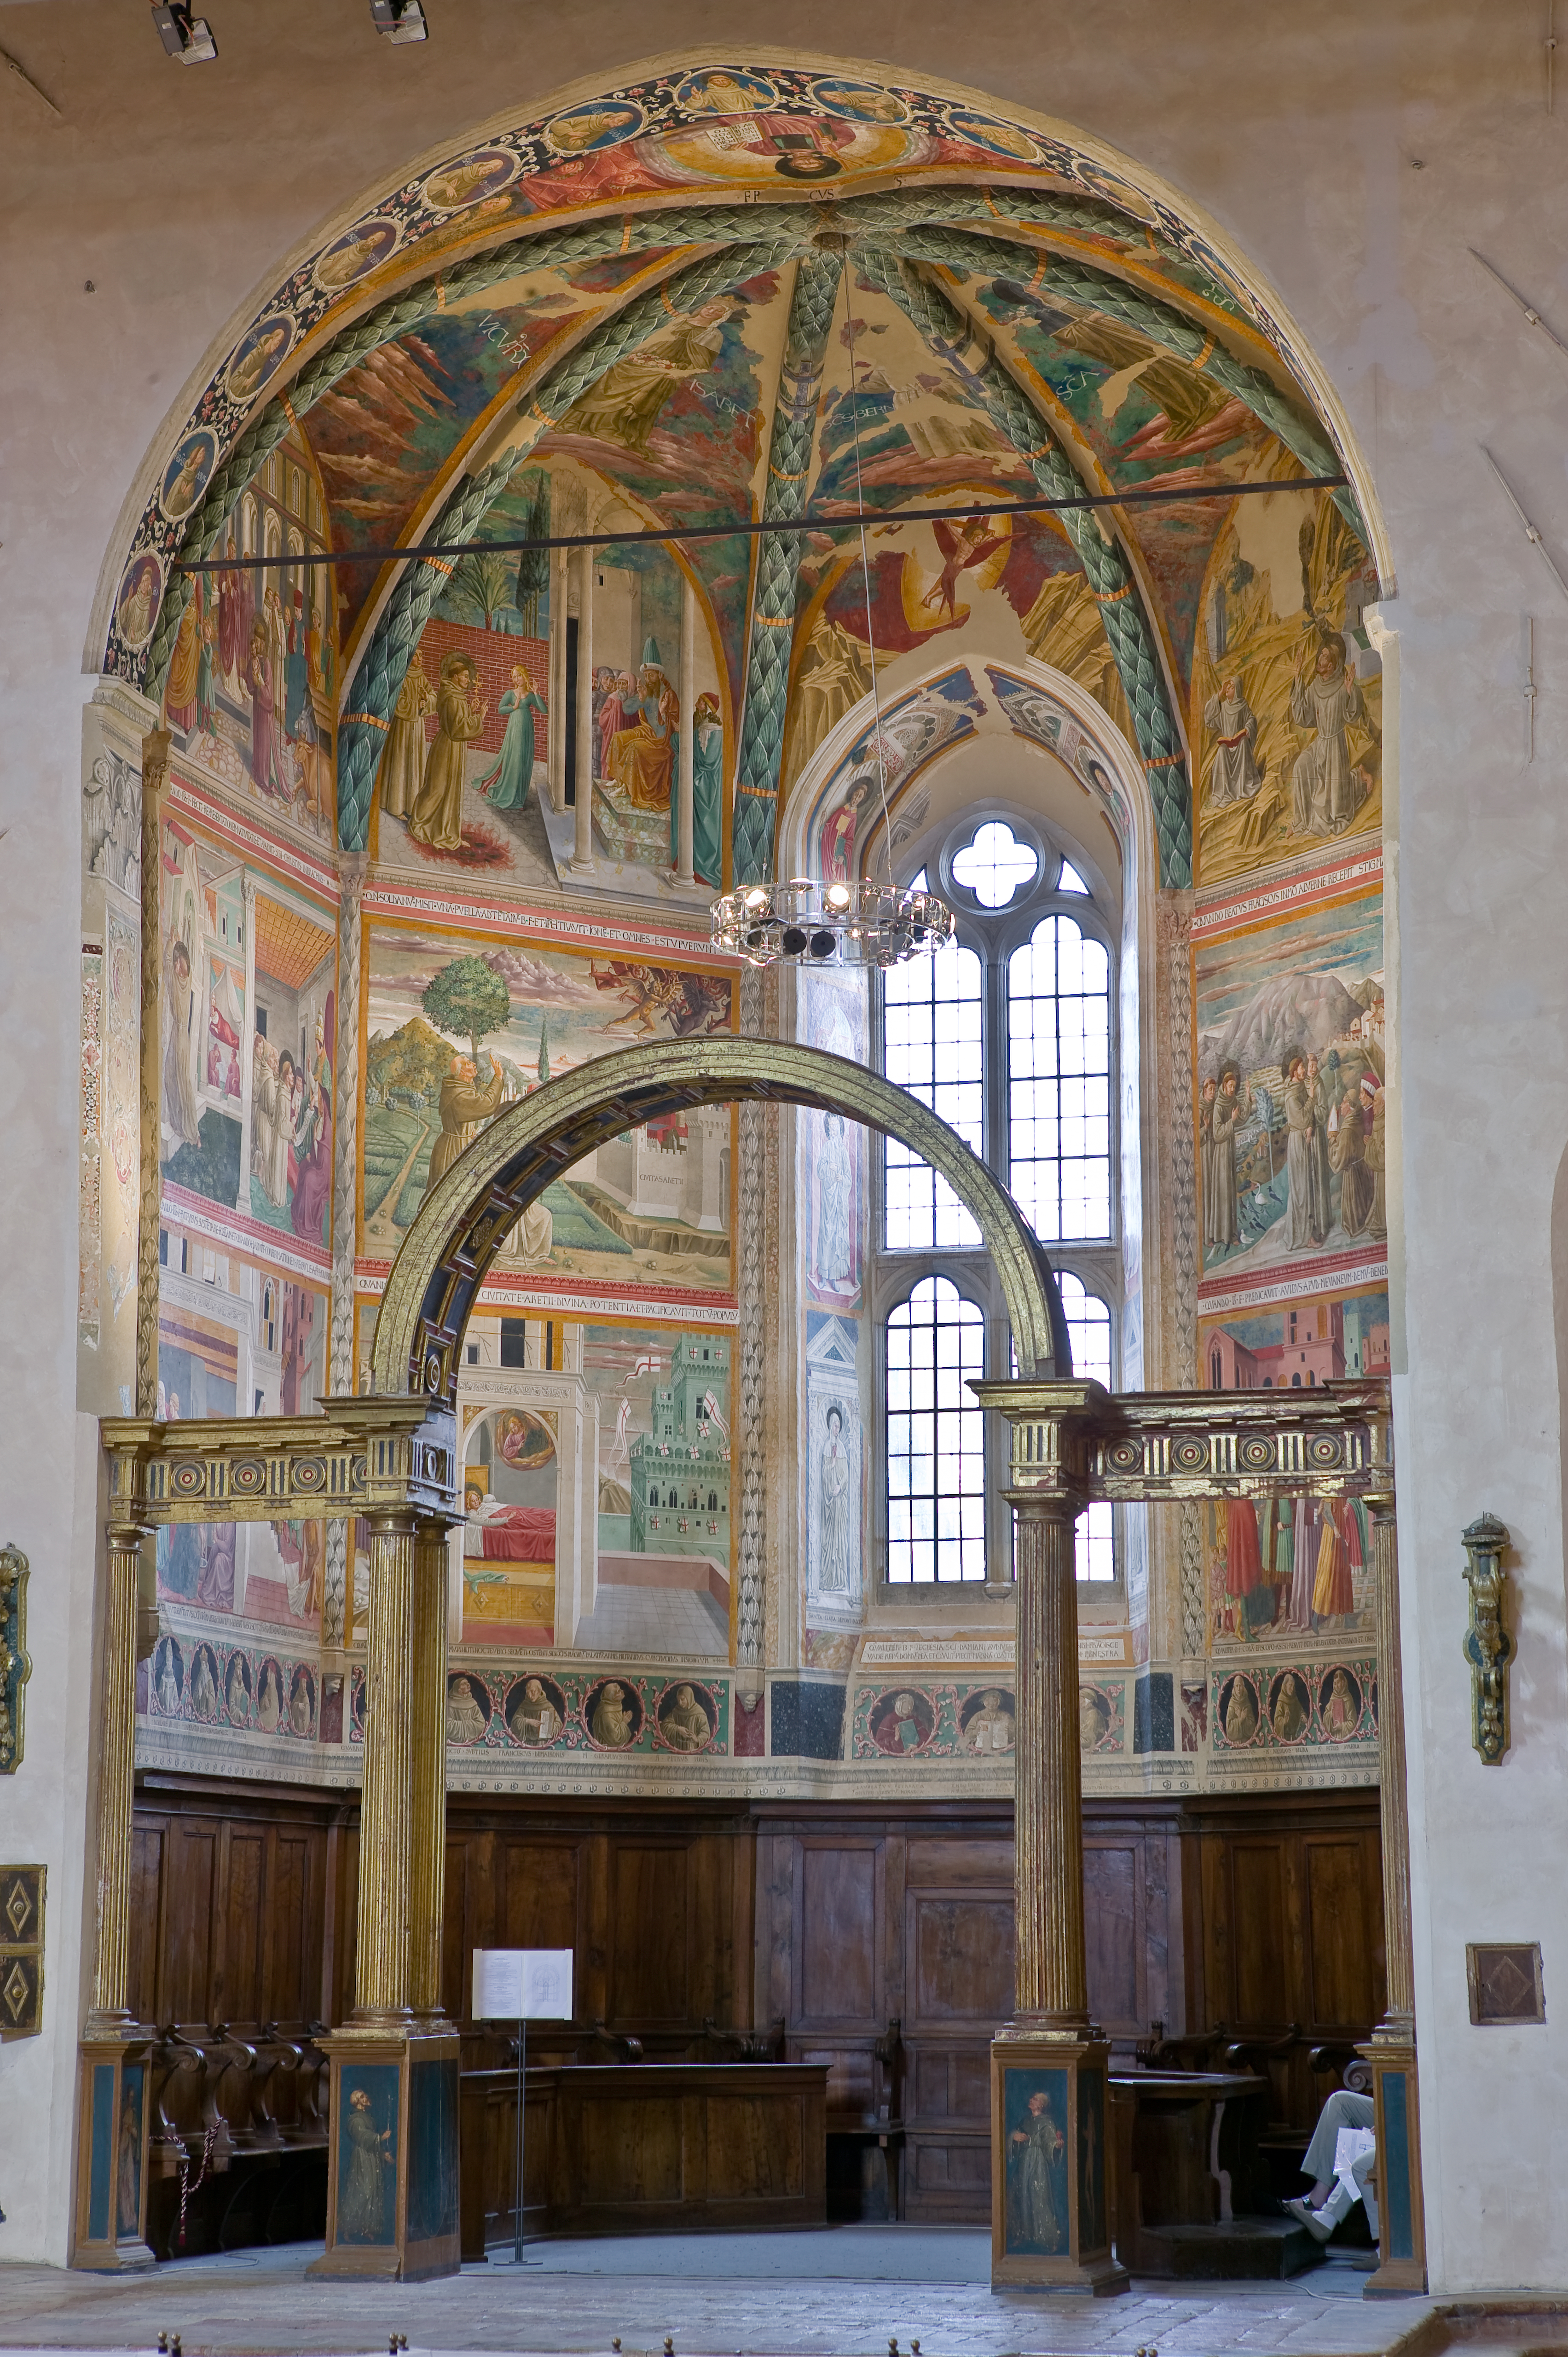 Montefalco, Museum of St. Francis, Church of St. Francis: the central apse with frescoes on the life of St. Francis, by Benozzo Gozzoli, 1450. 